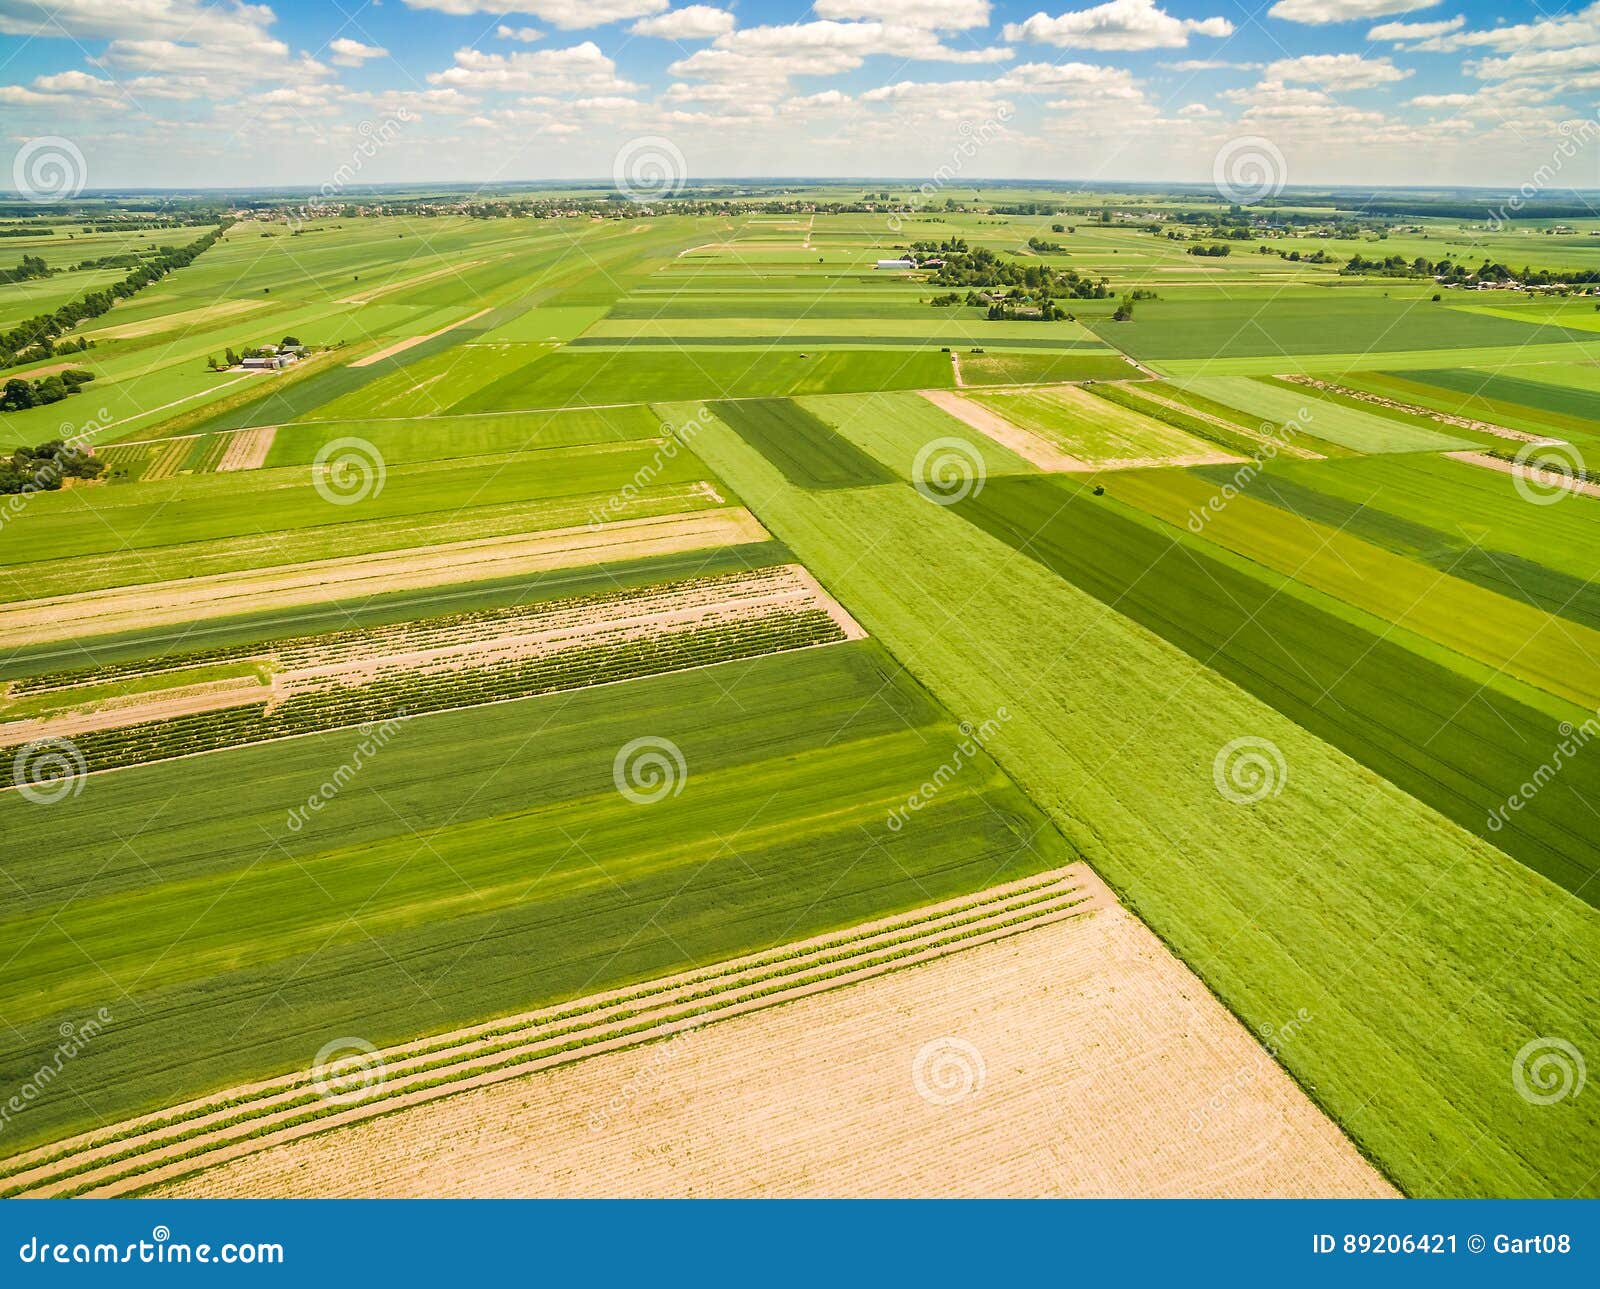 Countryside and Field Seen from the Bird`s Eye View. Crop Fields ...